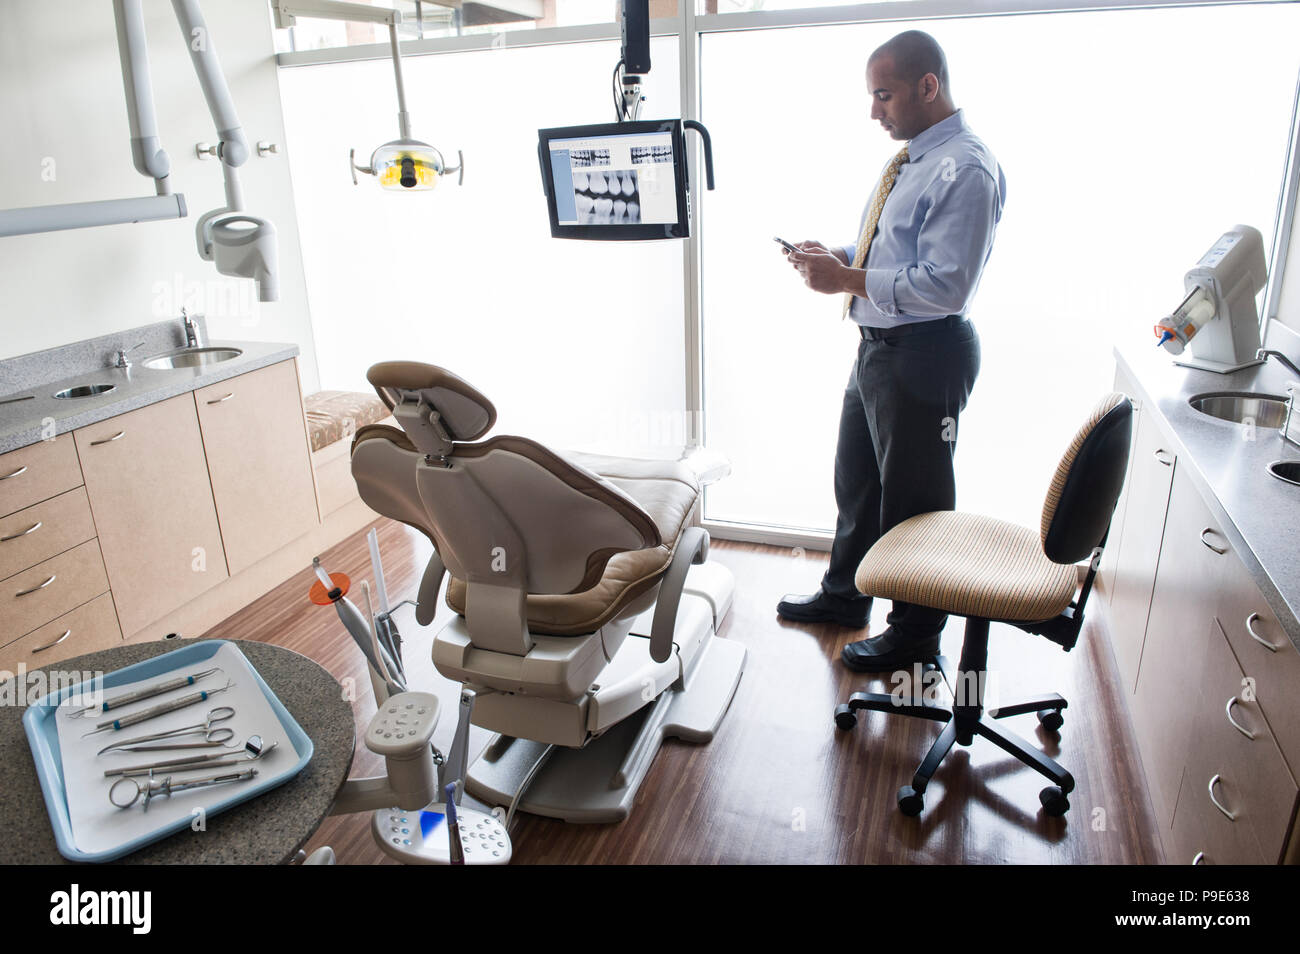 A Middle Eastern male dentist checking his cell phone in a dental examination room Stock Photo